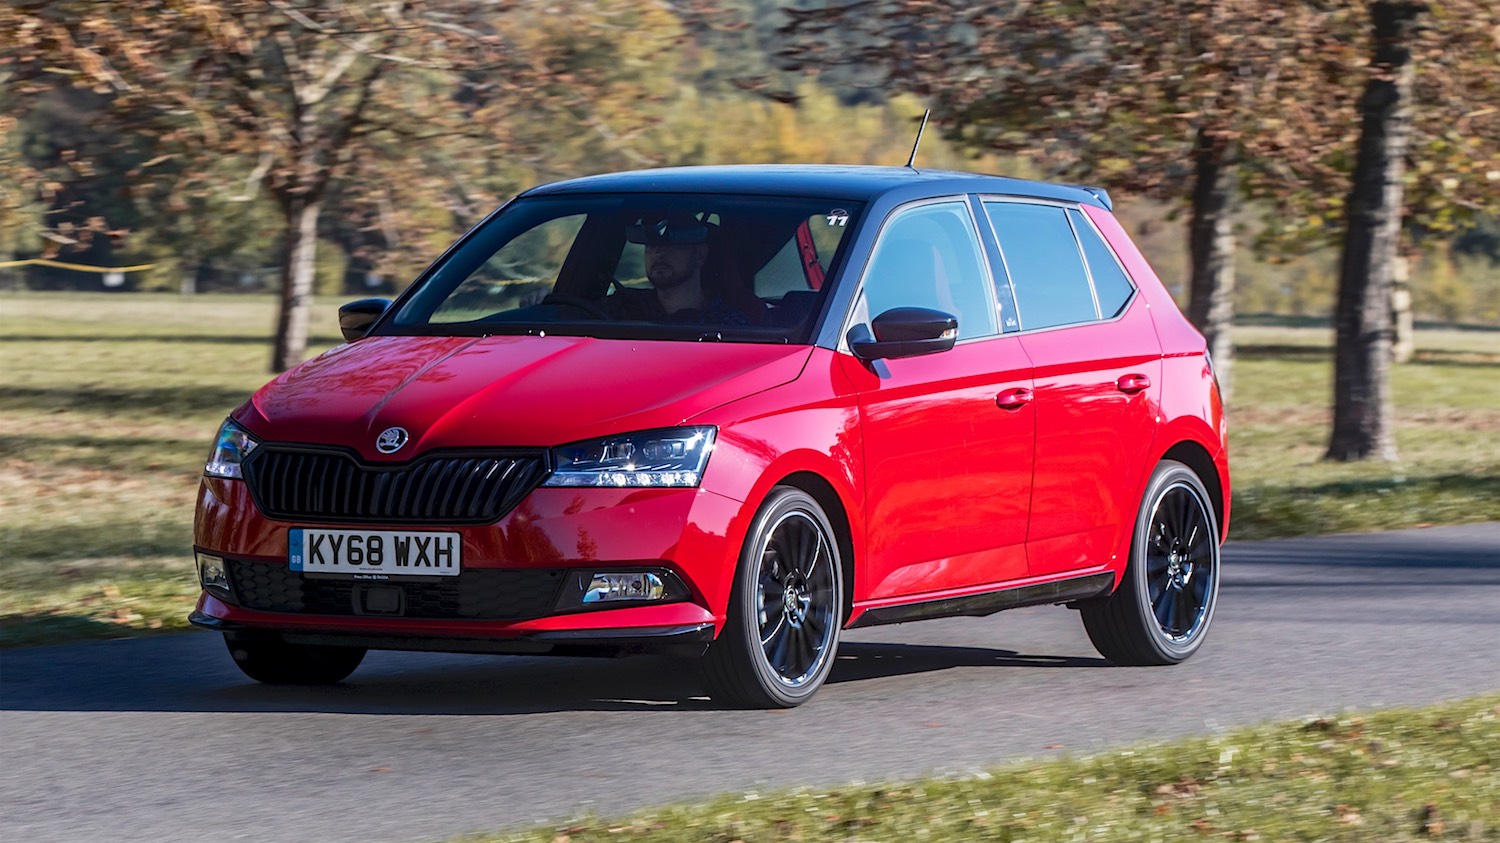 Tim Barnes Clay reviews the upated Skoda Fabia Monte Carlo for drive 13